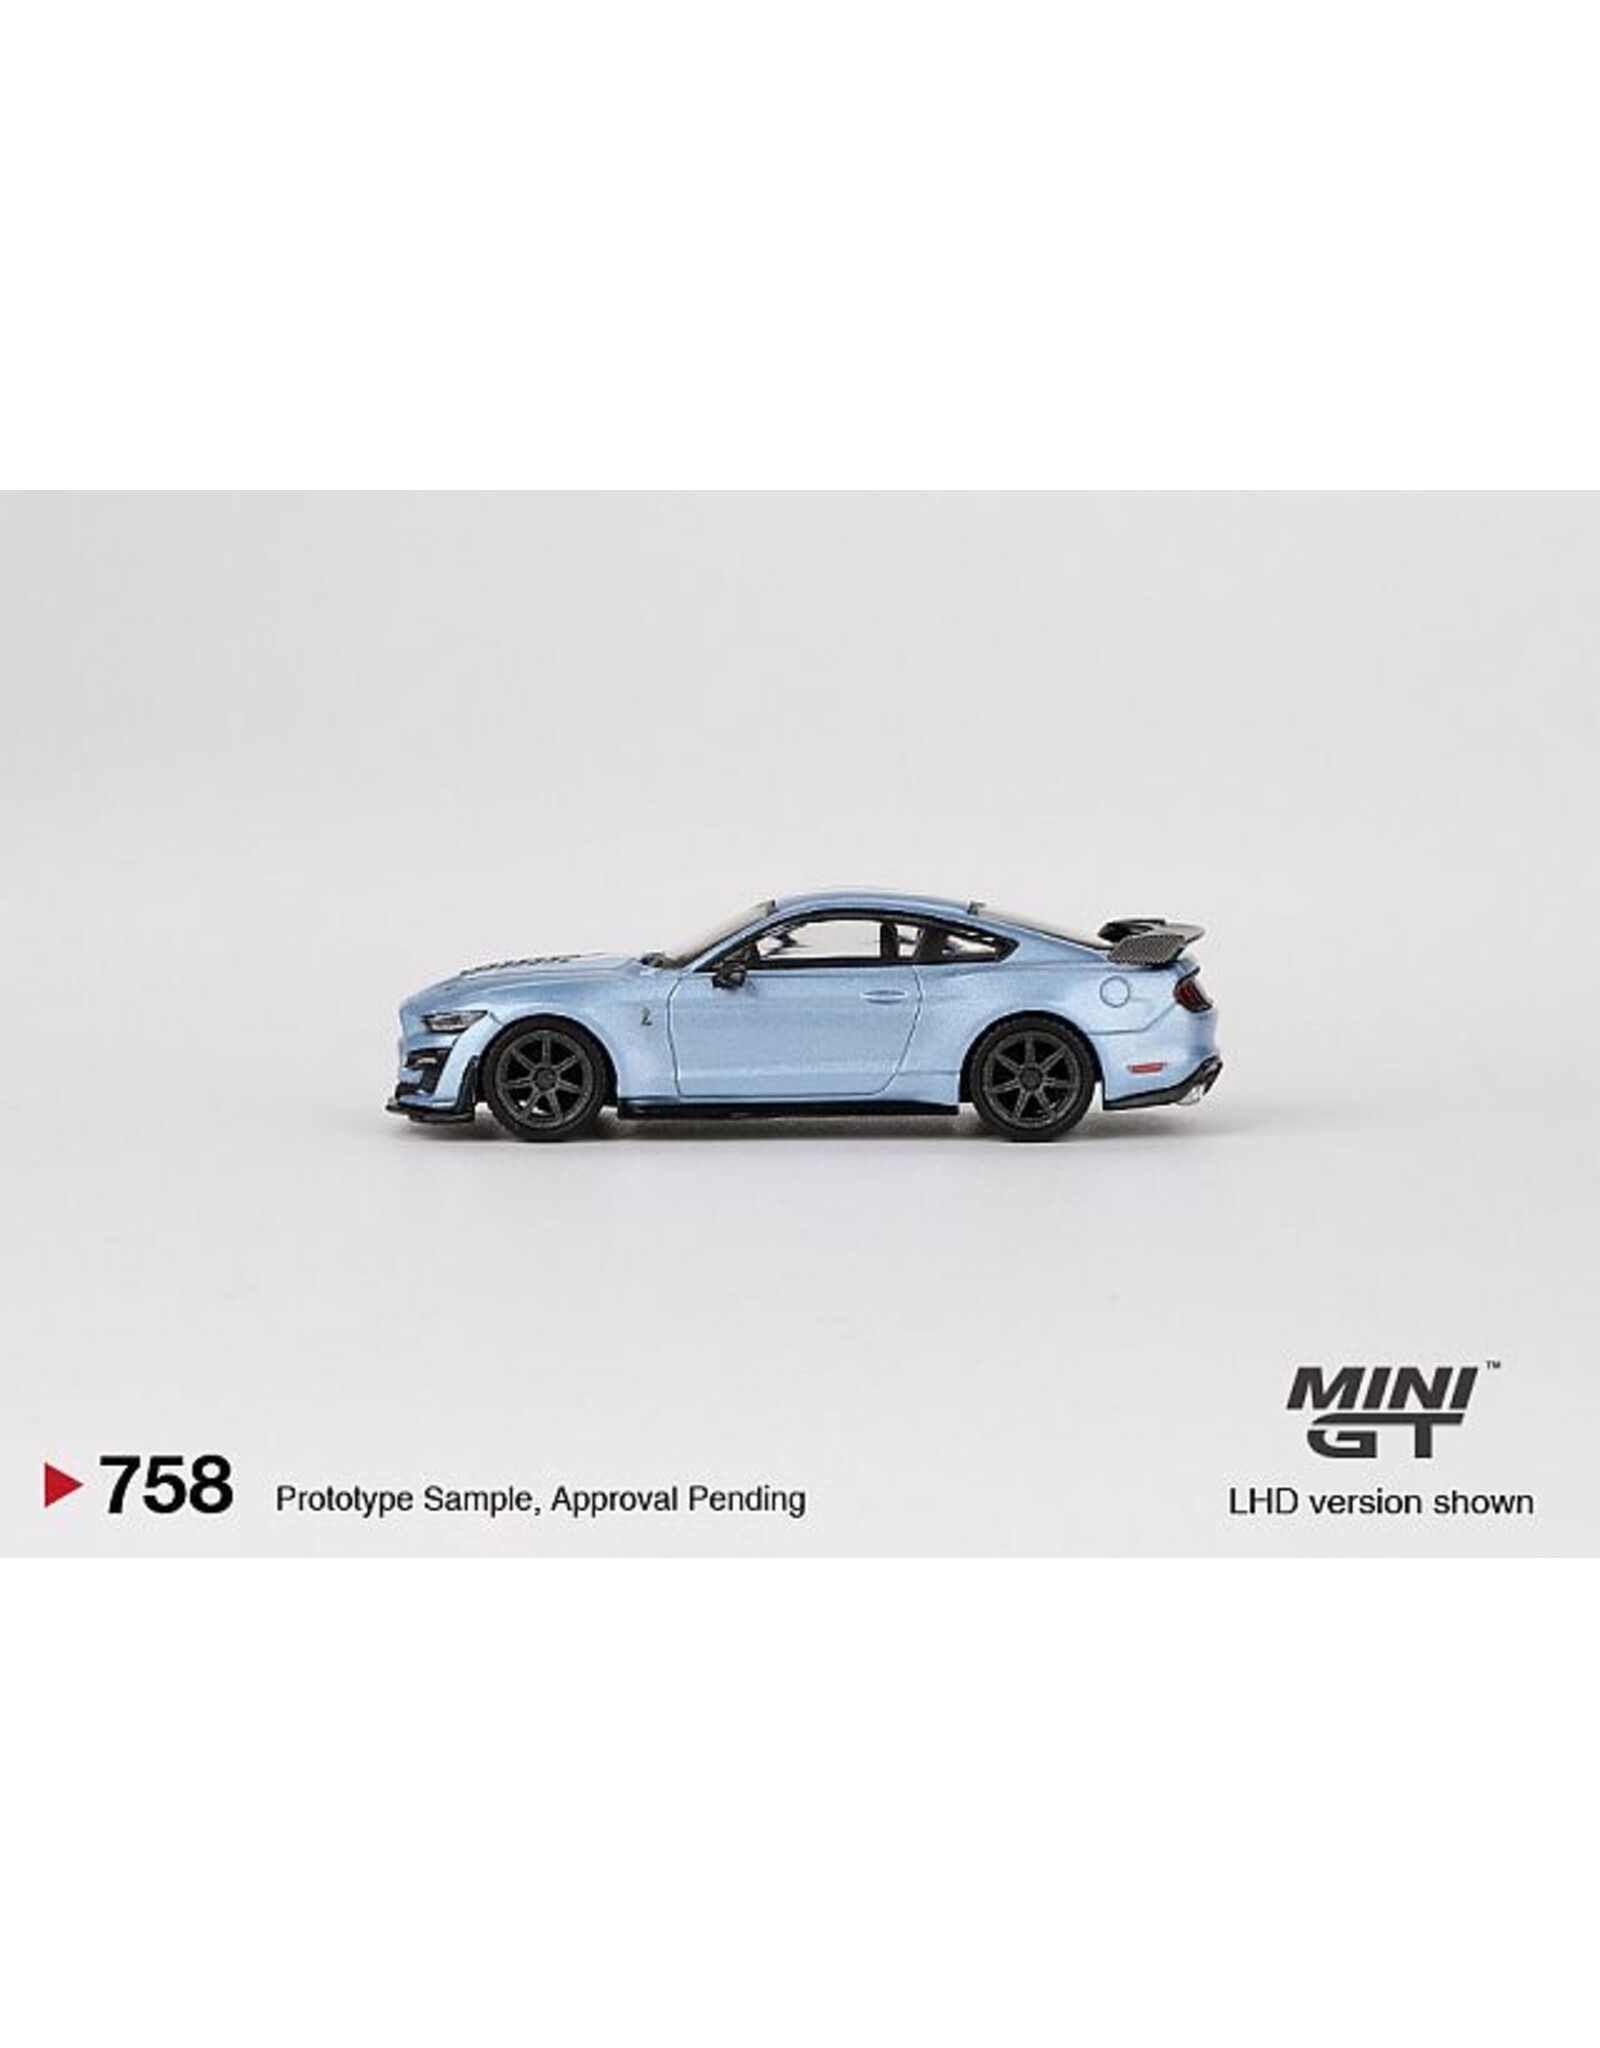 Ford by Shelby Ford Mustang Shelby GT500(2022)Heritage Edition(Brittany blue)